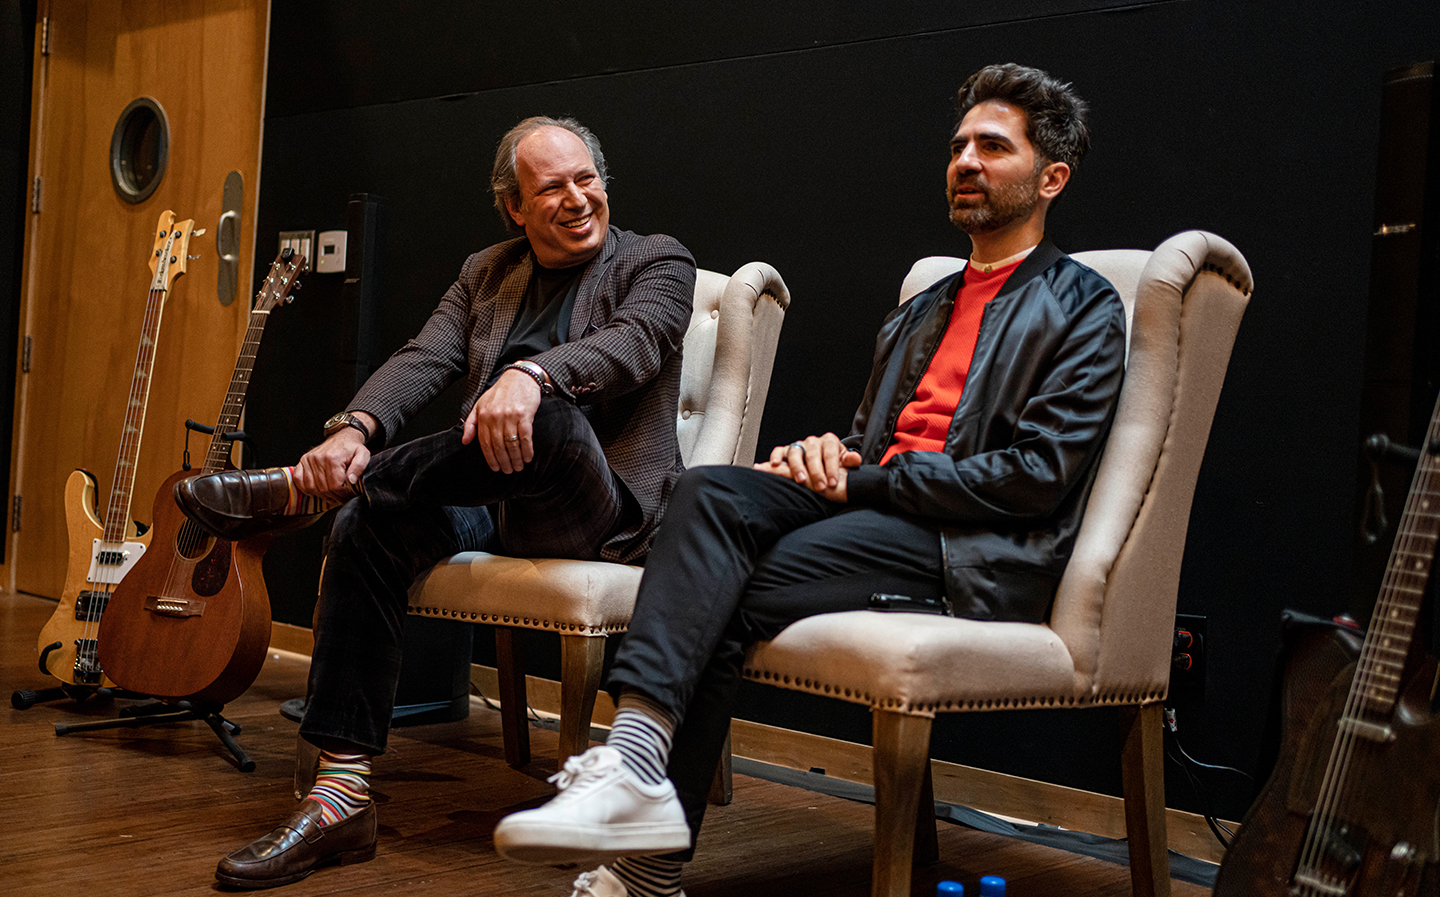 Hollywood composer Hans Zimmer on creating the soundscape for BMW's future cars - Lorenzo Vitale